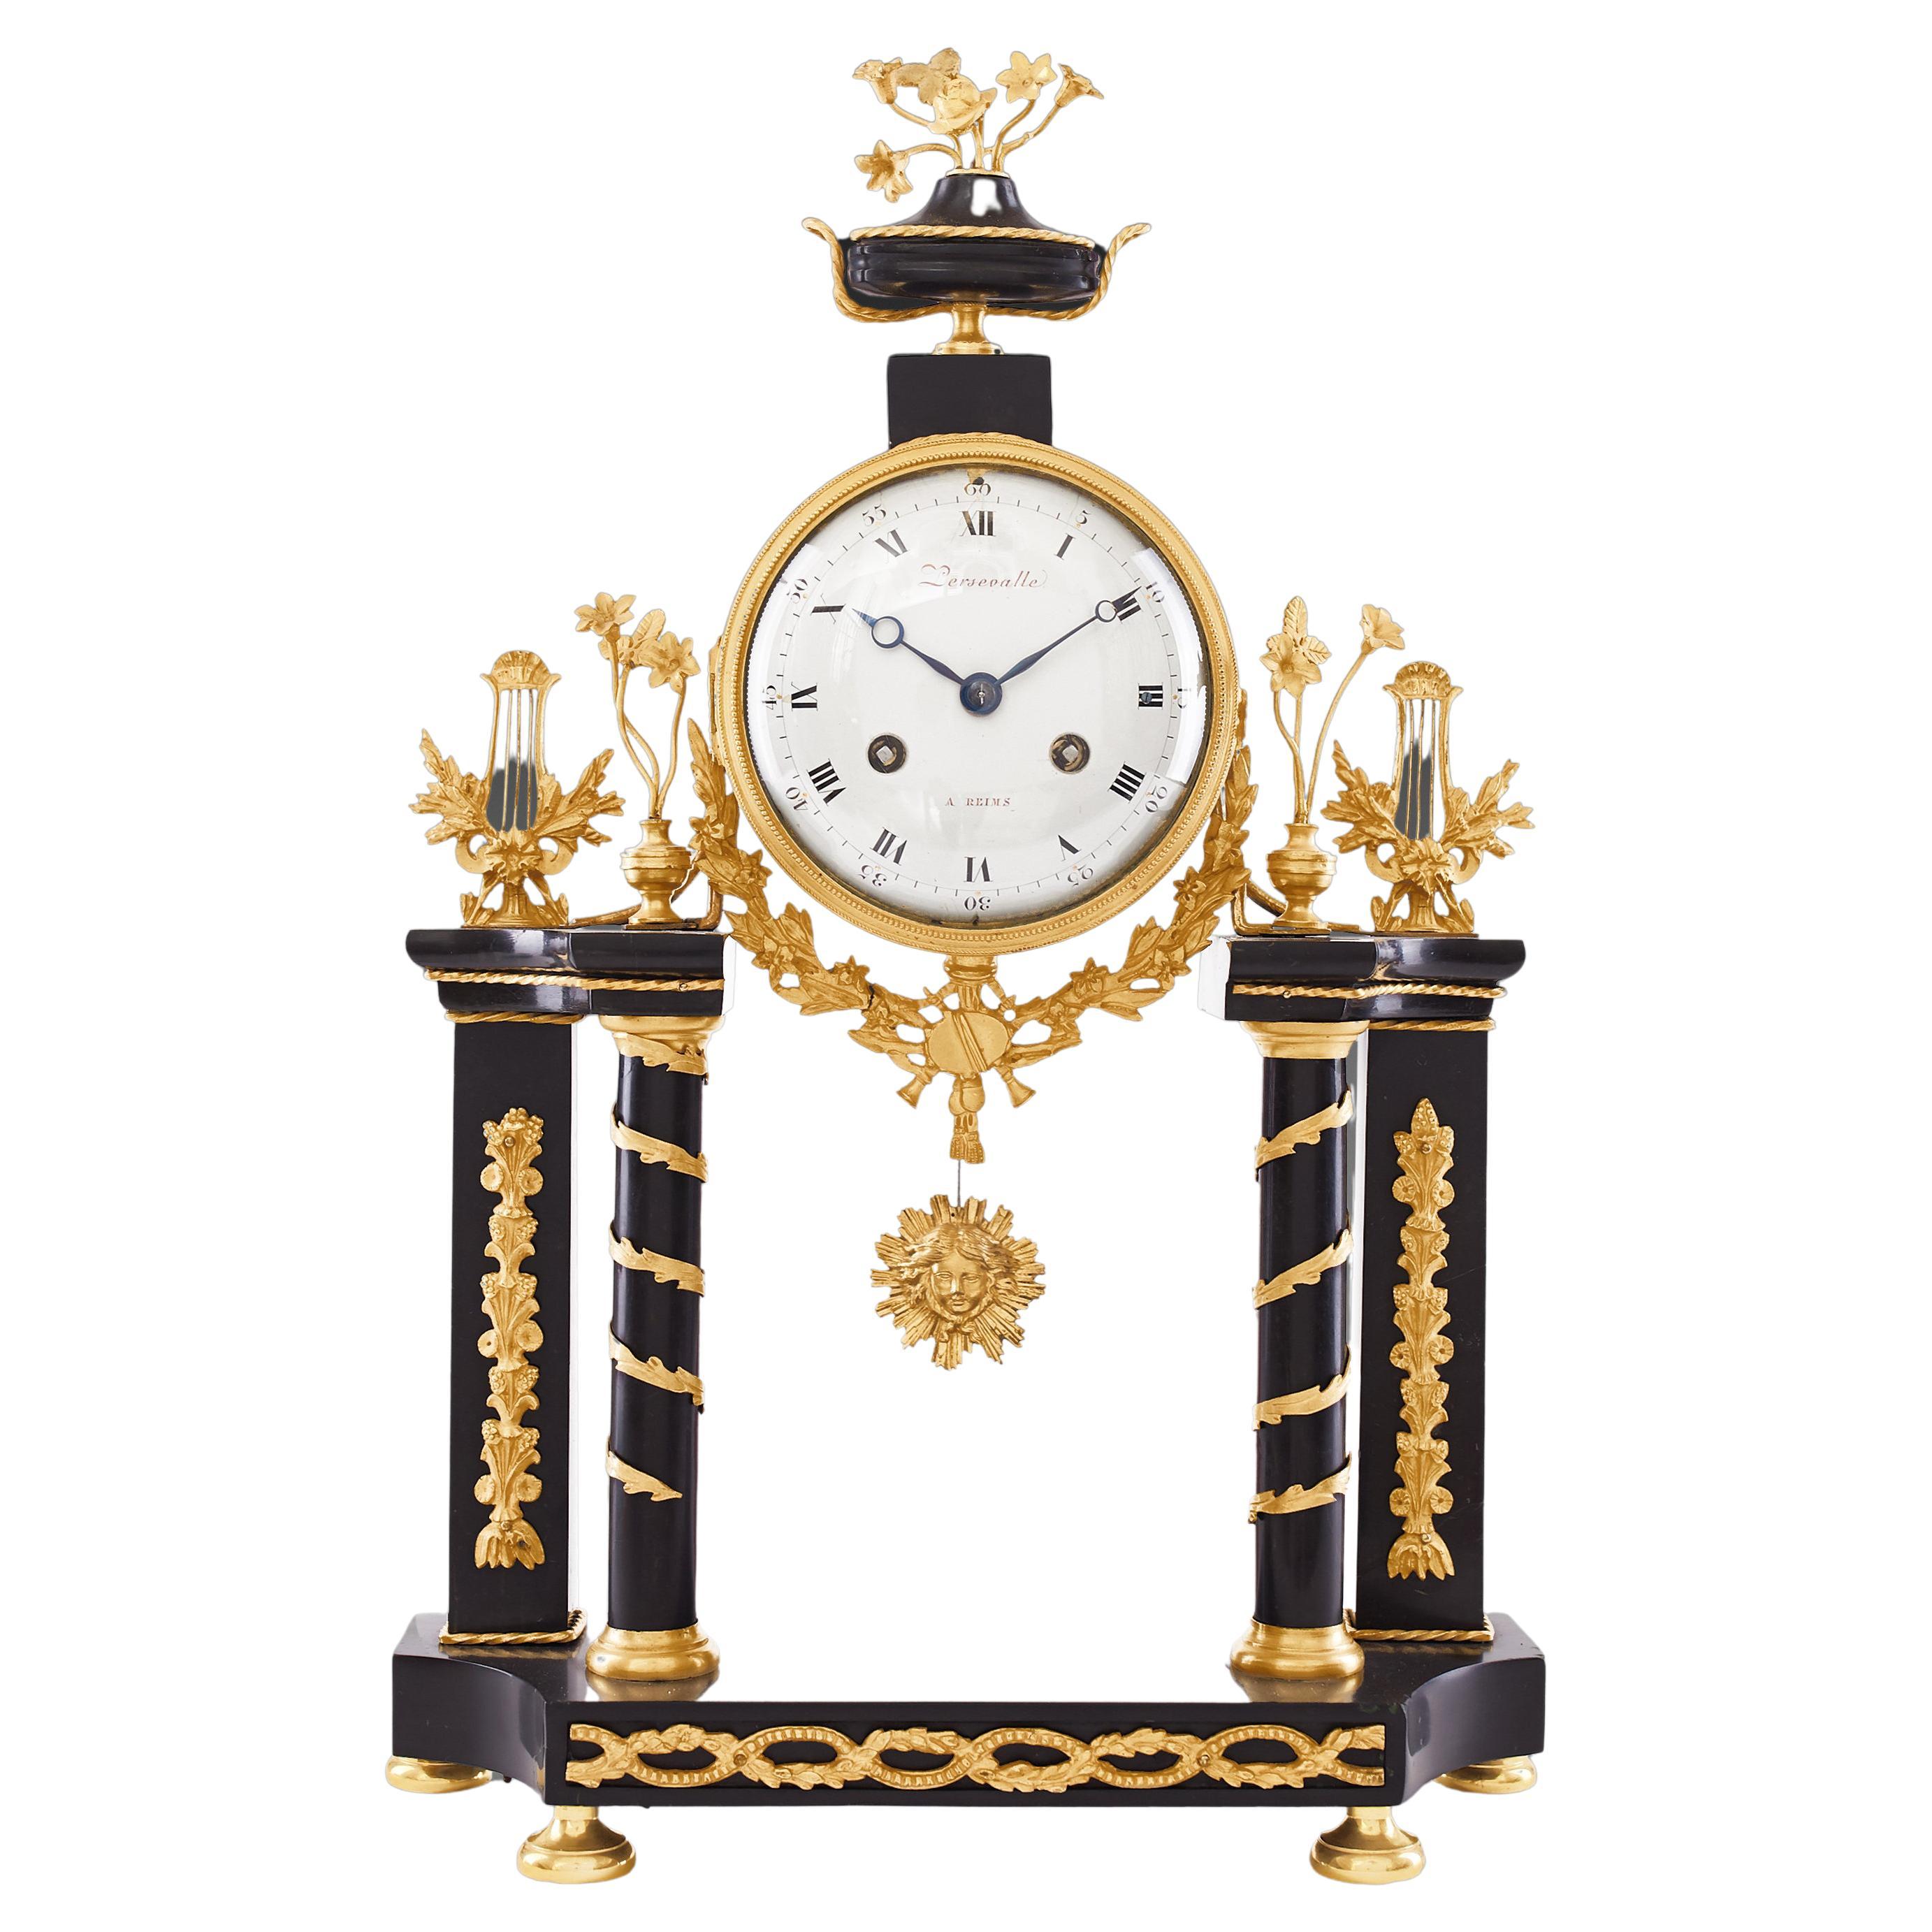 The Clock is in a Excellent and Perfect Working Condition, Also it Has Recently For Sale